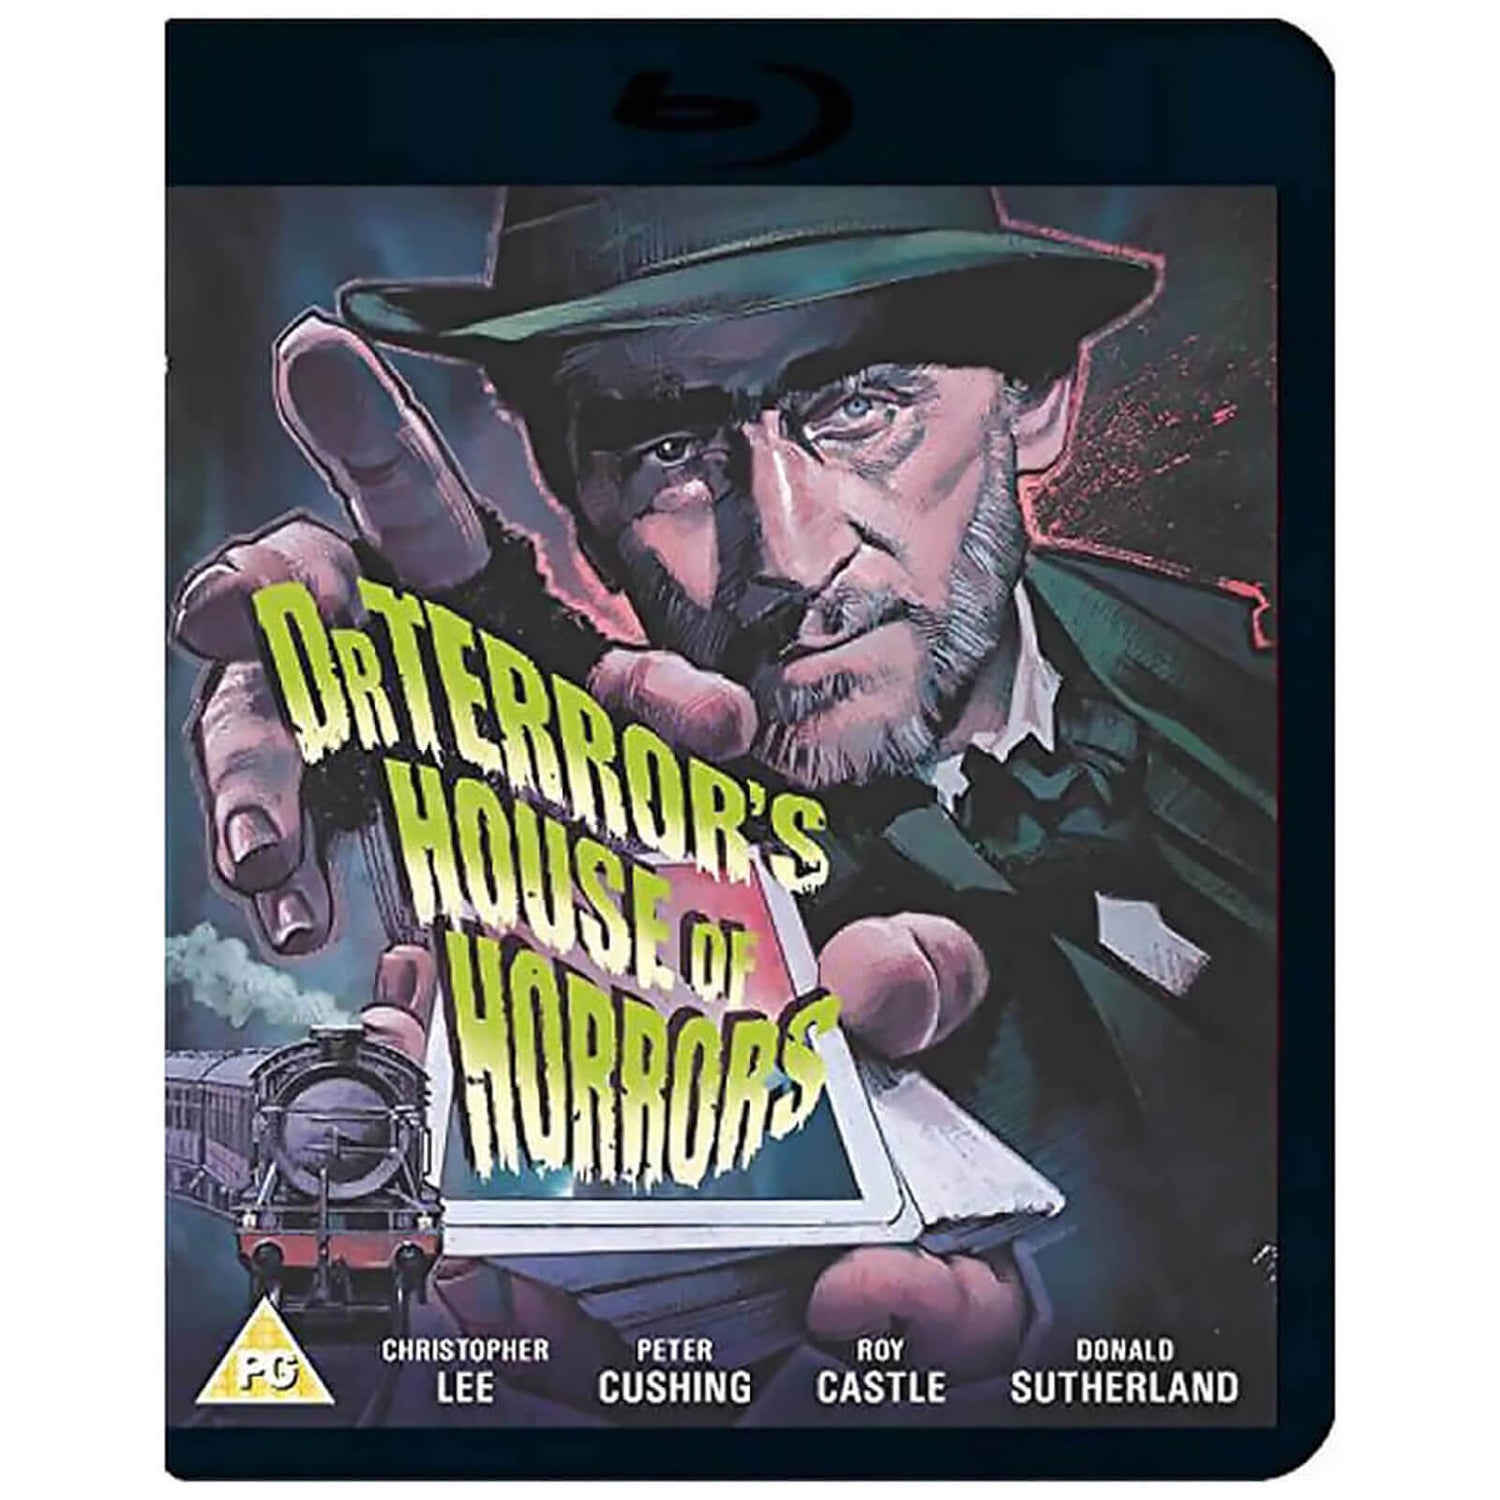 Dr. Terror's House Of Horrors Blu-ray